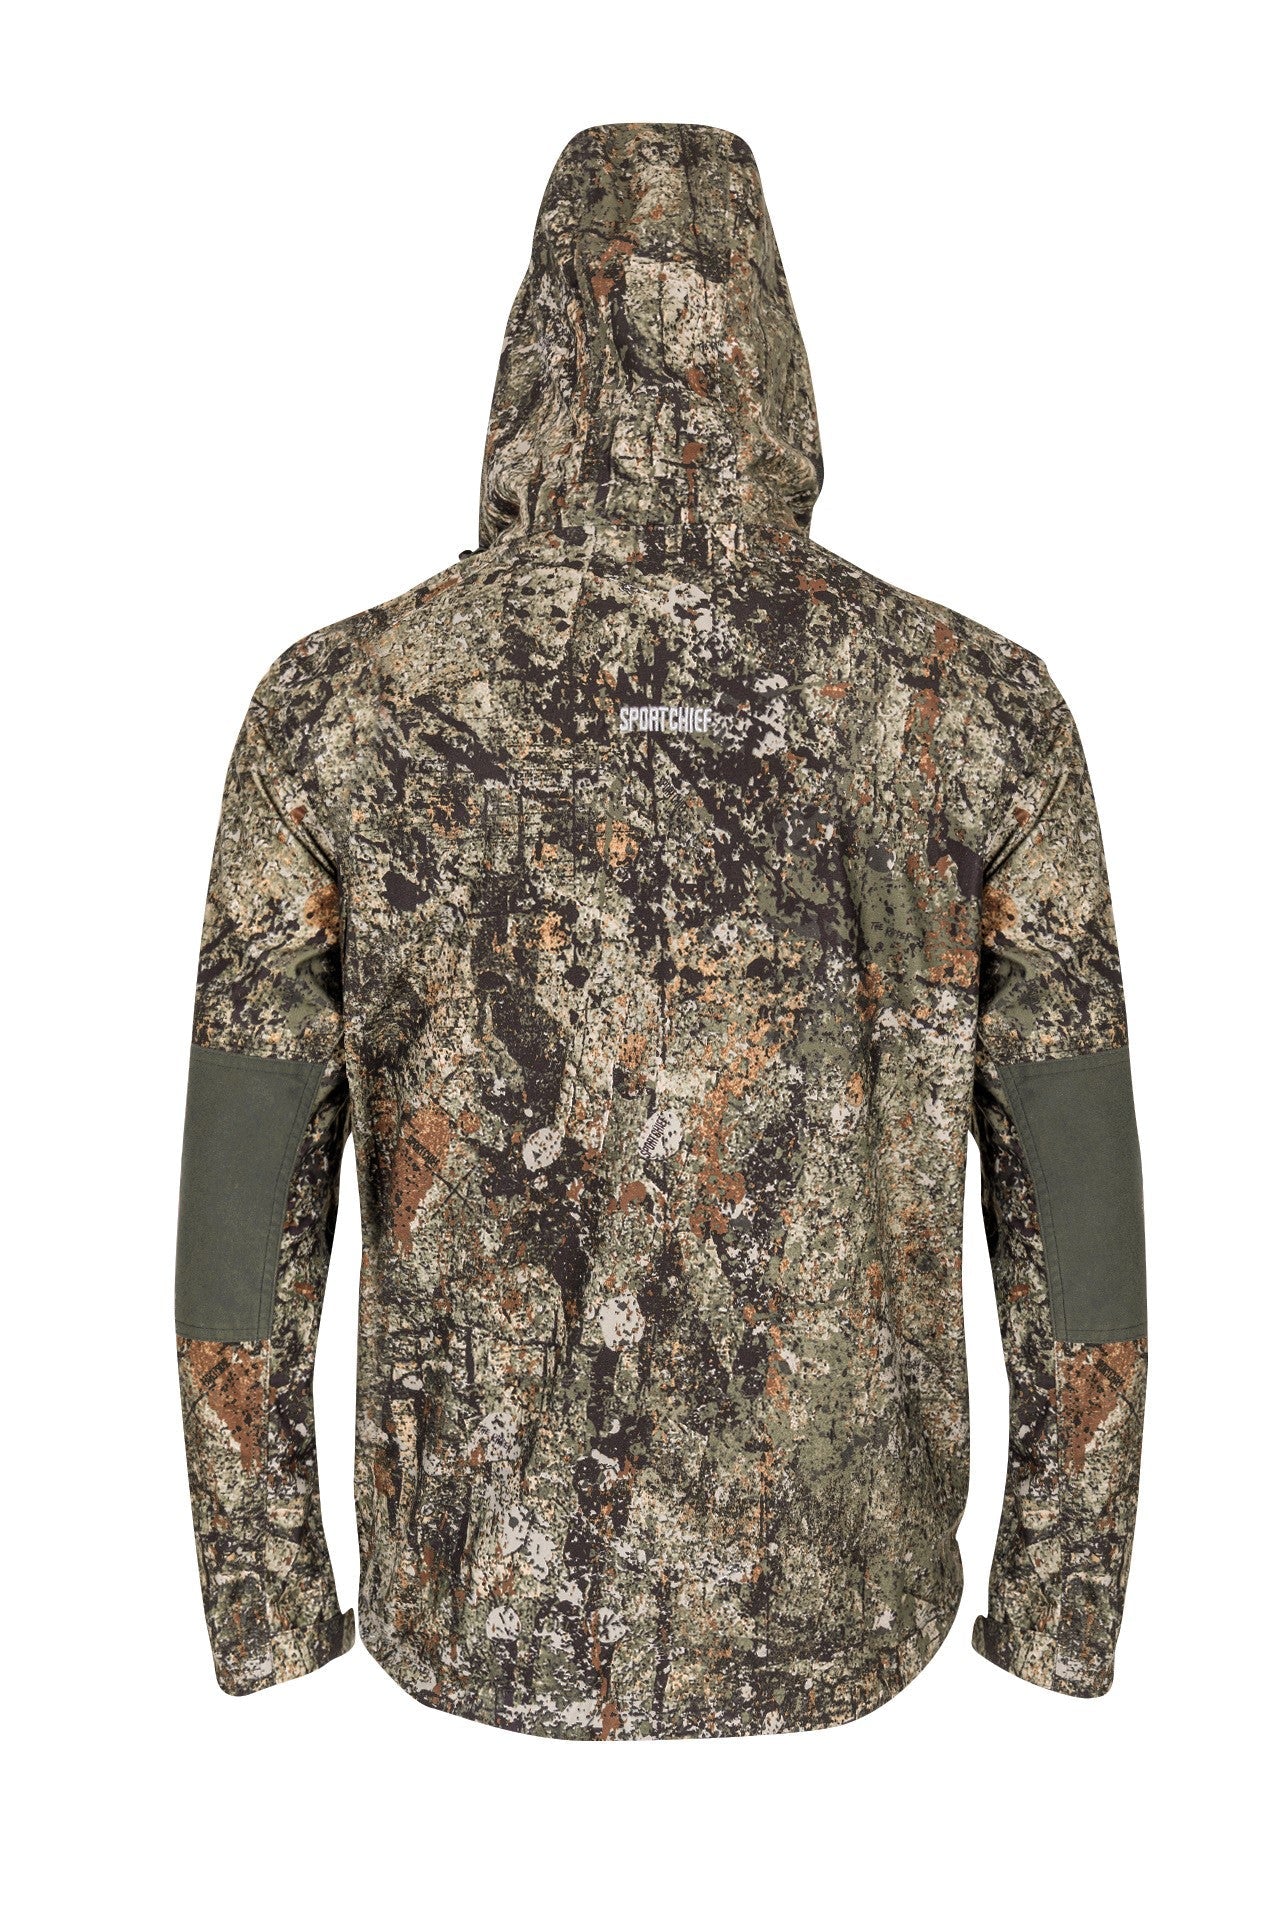 "Express 2.0" hunting jacket for men by Sportchief